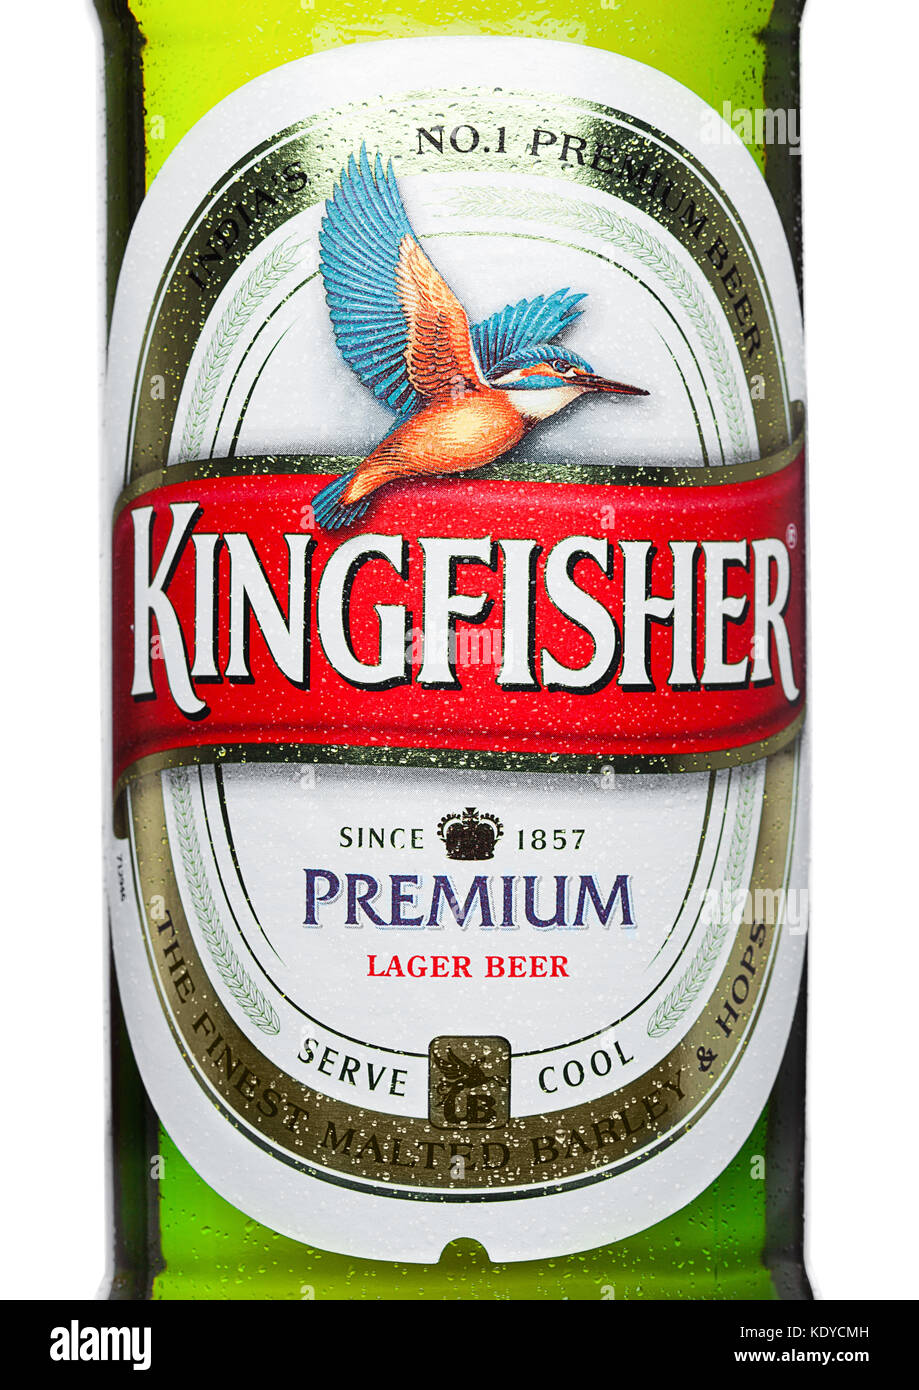 LONDON,UK - MARCH 23, 2017 : Bottle of Kingfisher beer on white ...